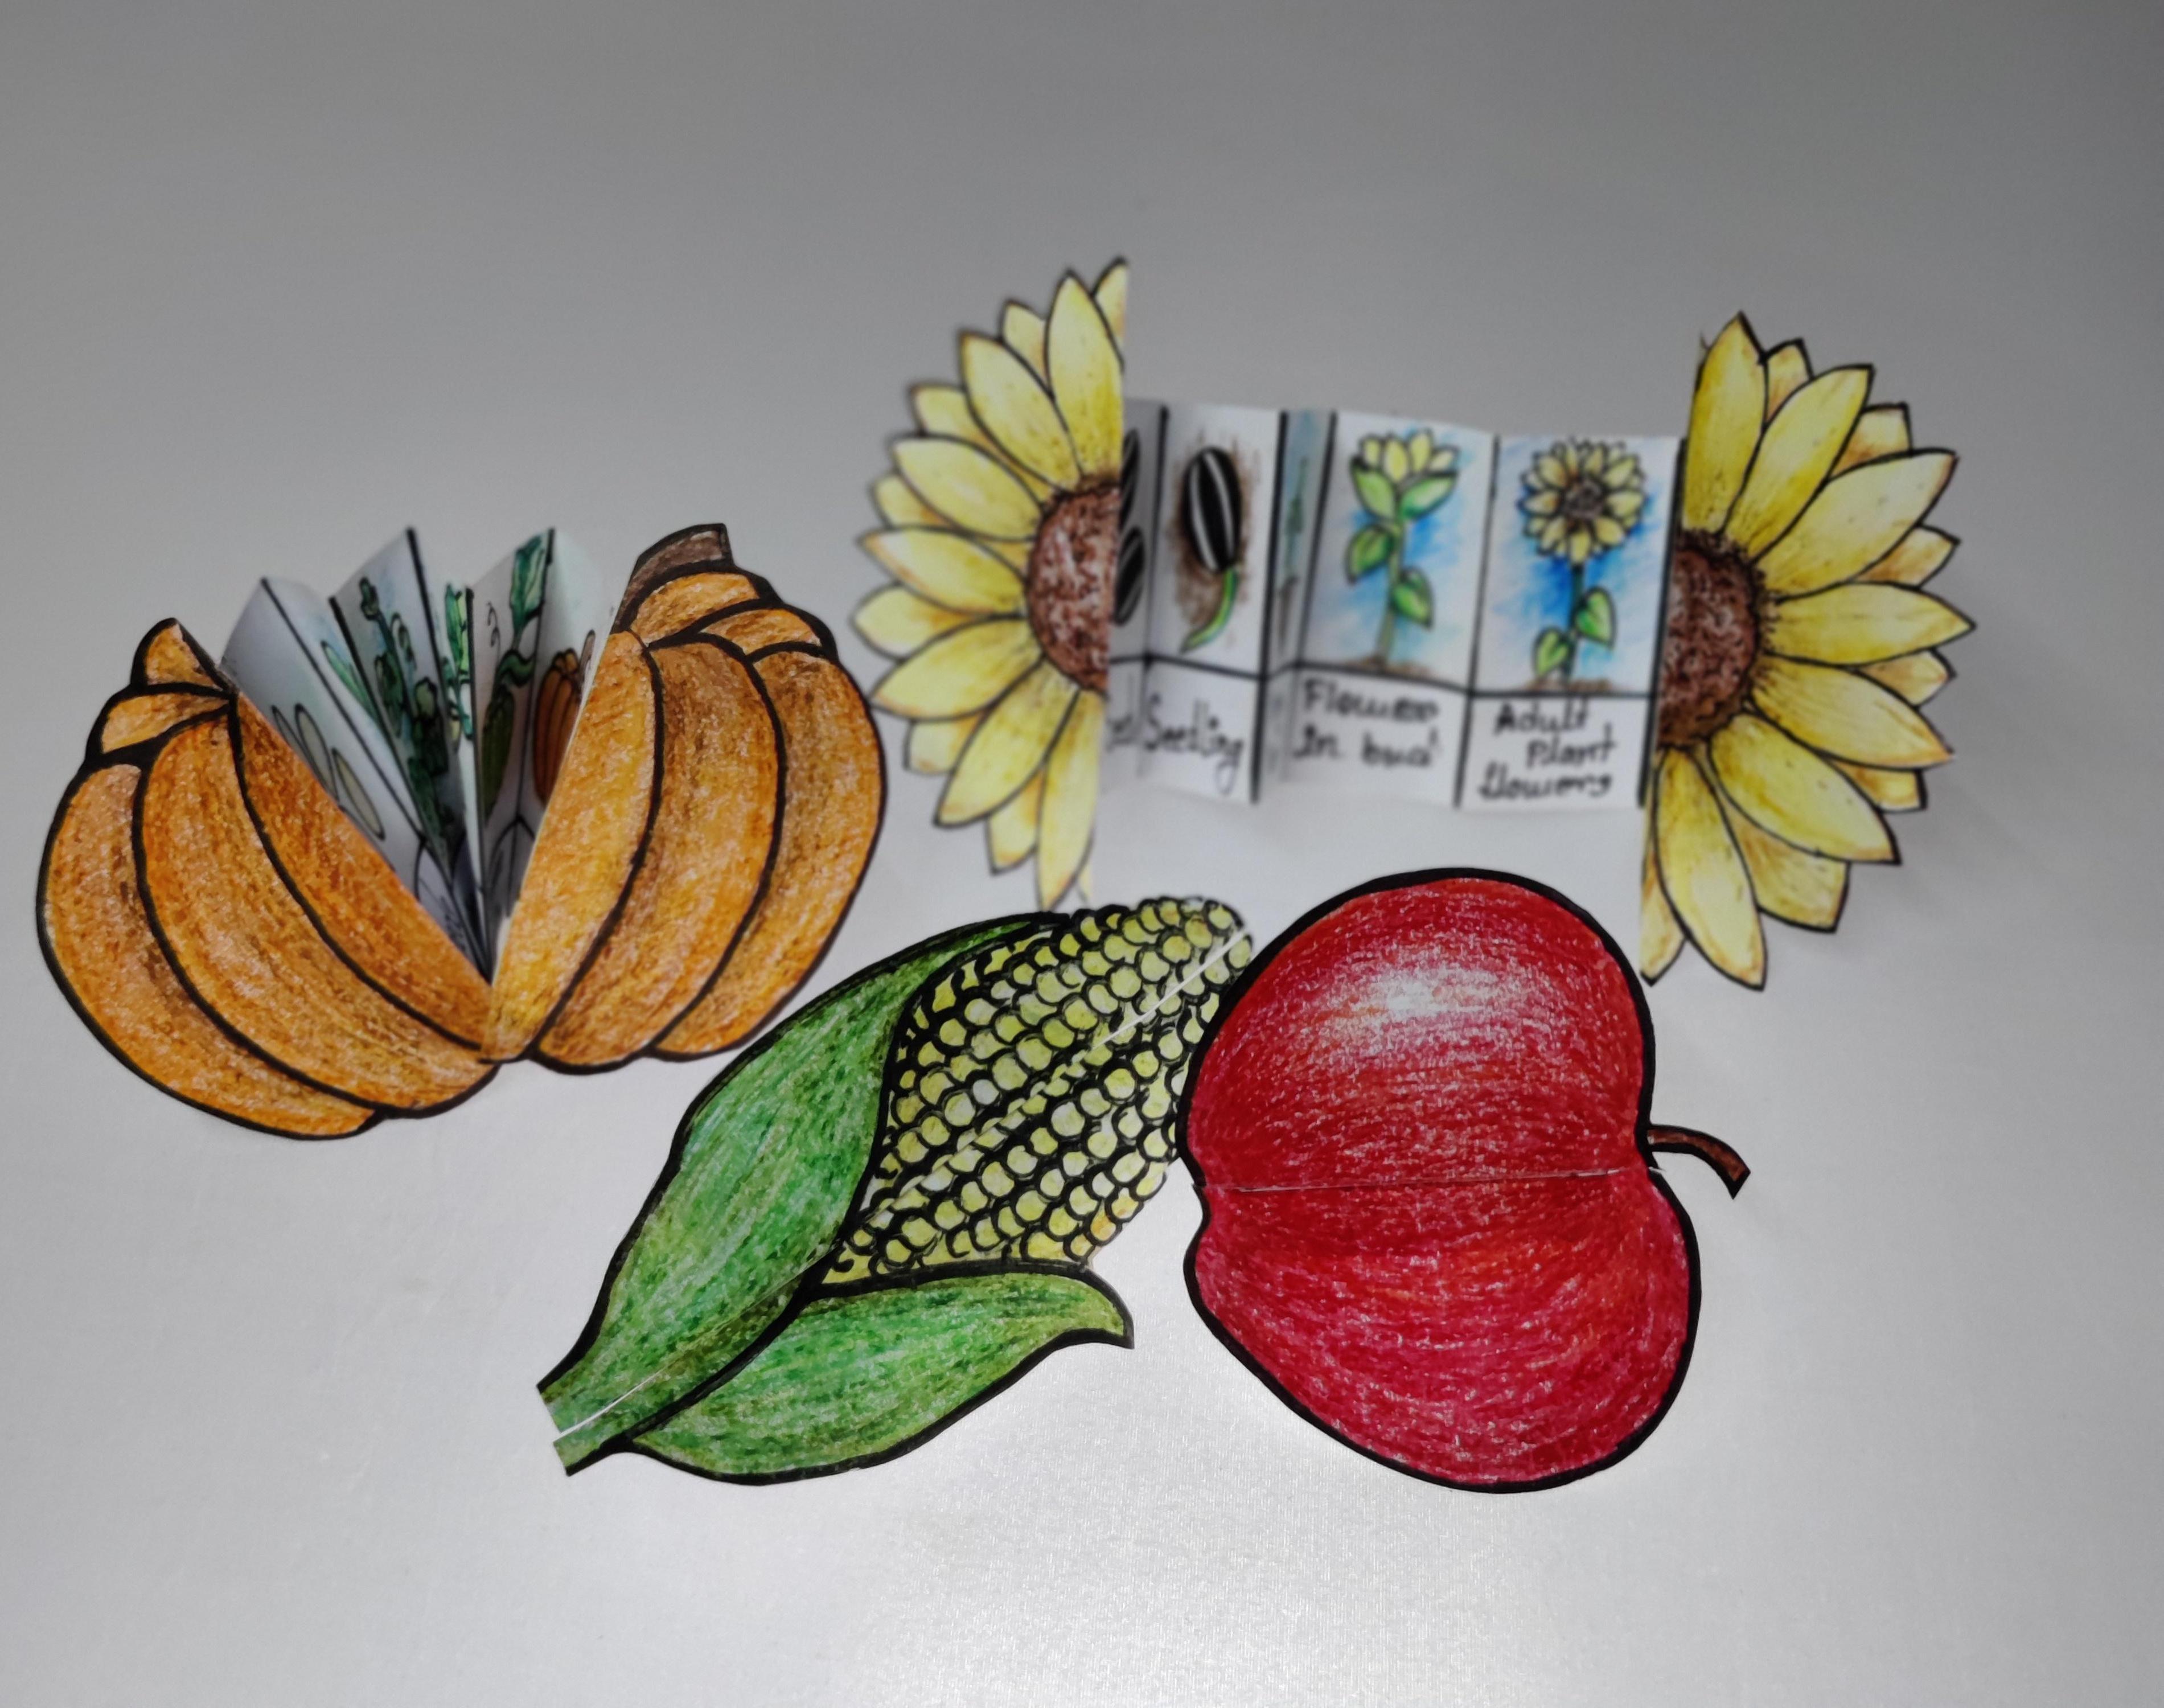 Fruity Fun: Exploring the Life Cycle of Fruits Through Origami and Color!